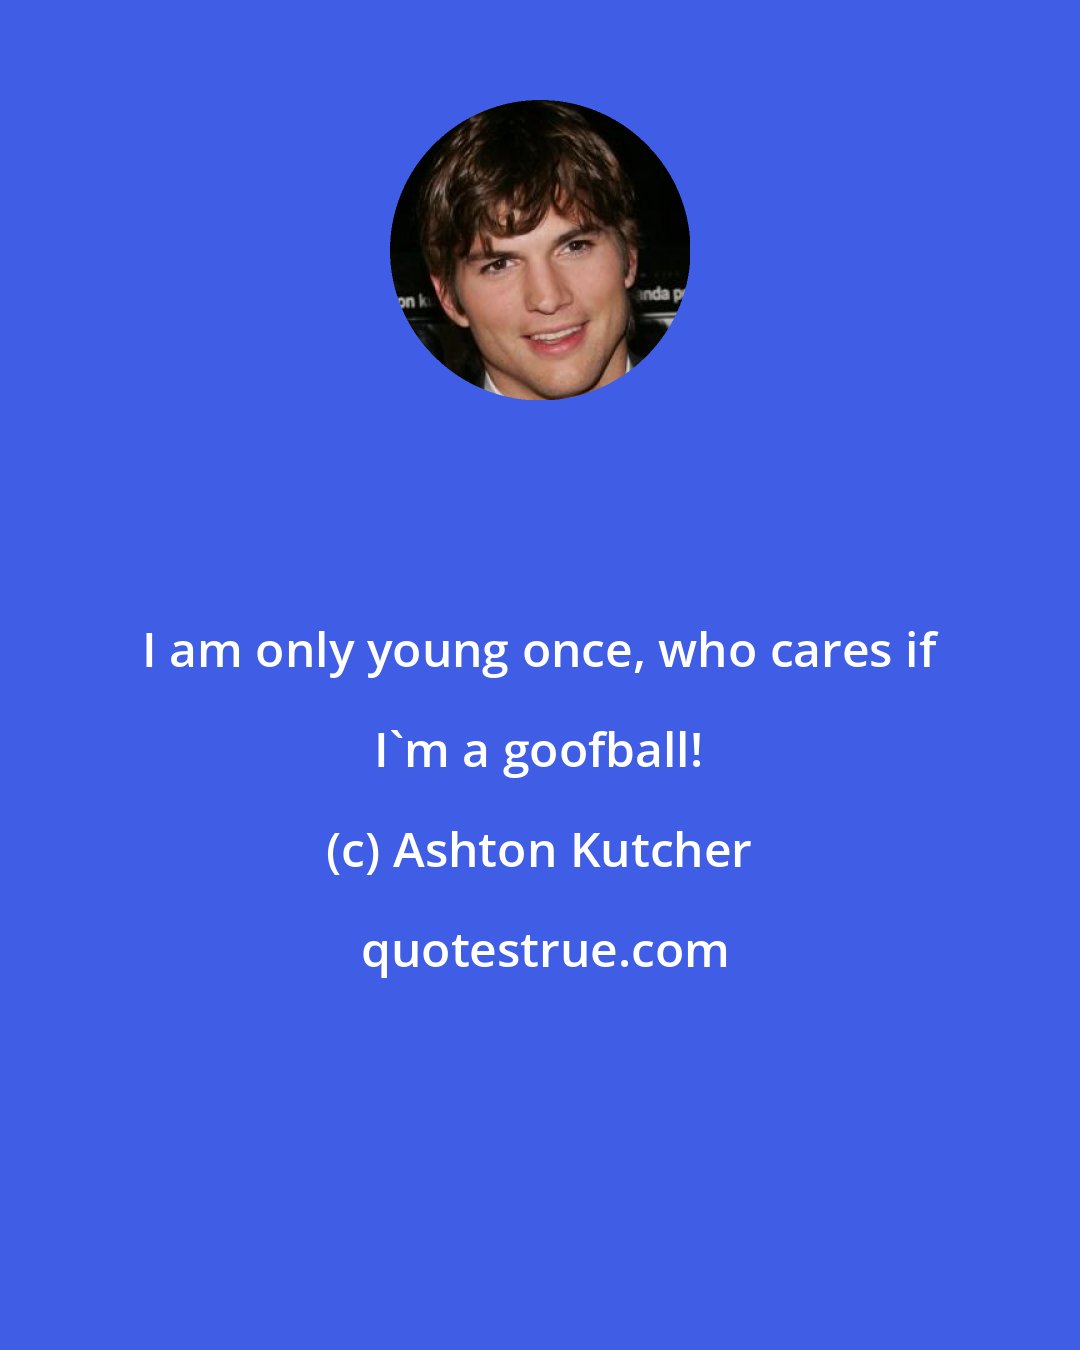 Ashton Kutcher: I am only young once, who cares if I'm a goofball!